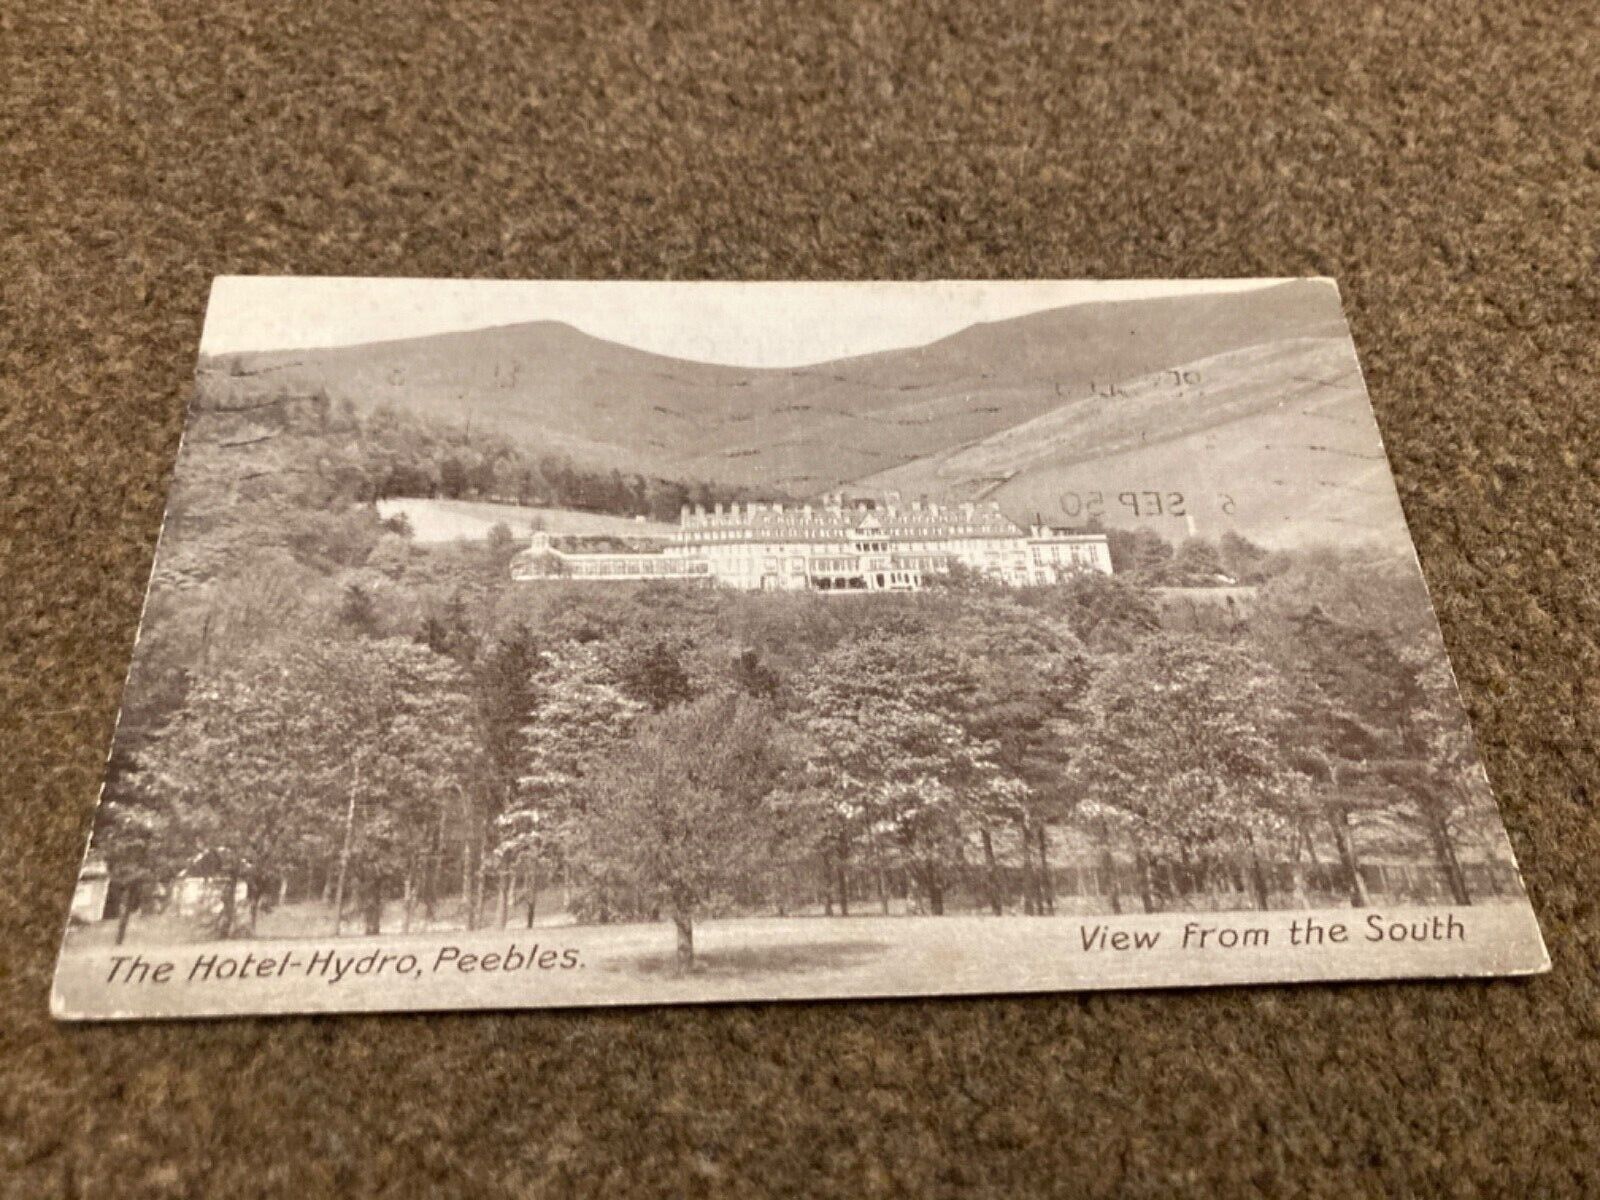 House Clearance - Old Service of The Hotel-Hydro, Peebles, Scotland